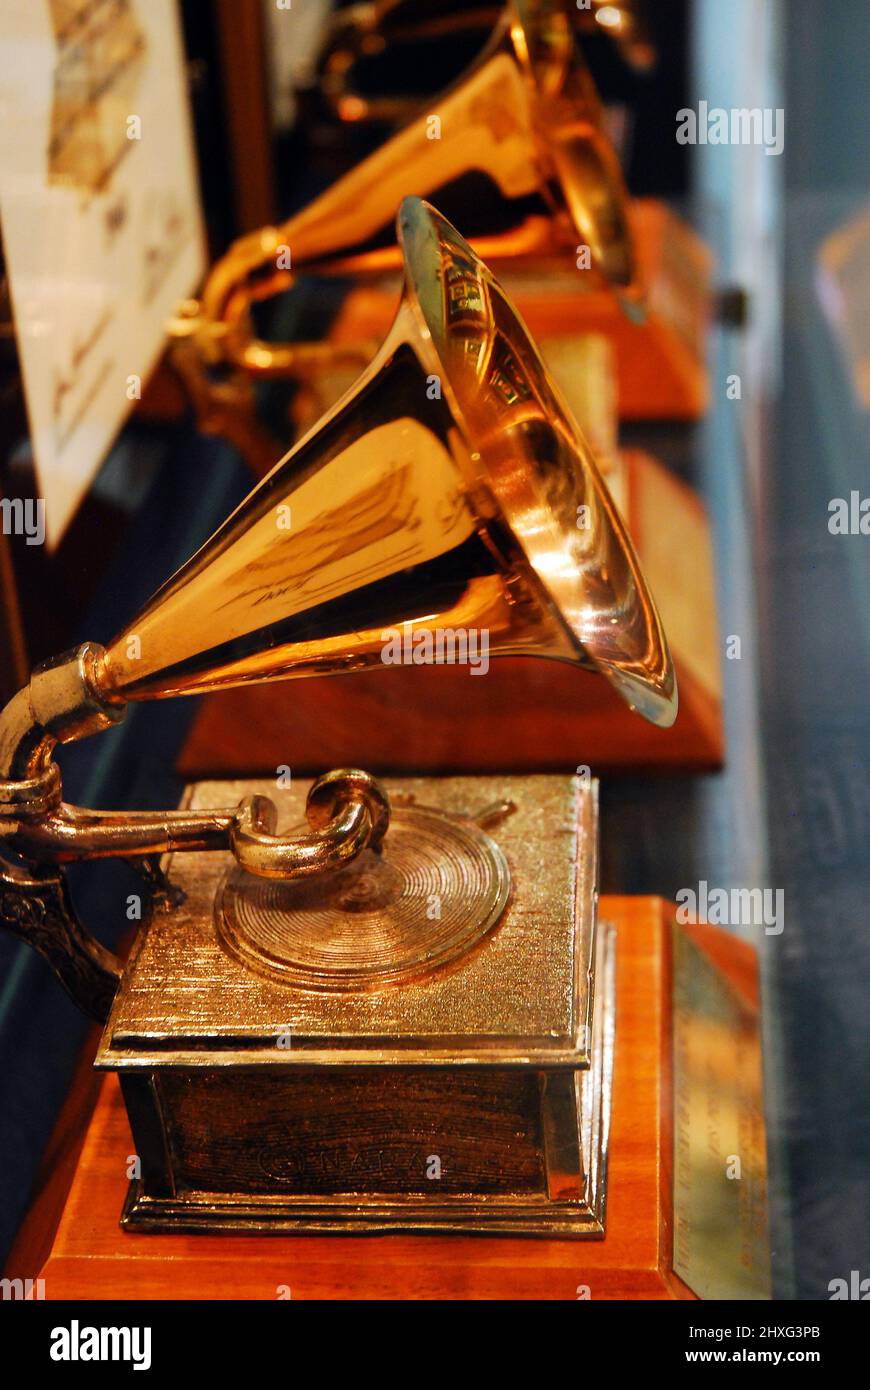 Grammy Awards, given to outstanding achievement in music and recorded sound, are on display Stock Photo